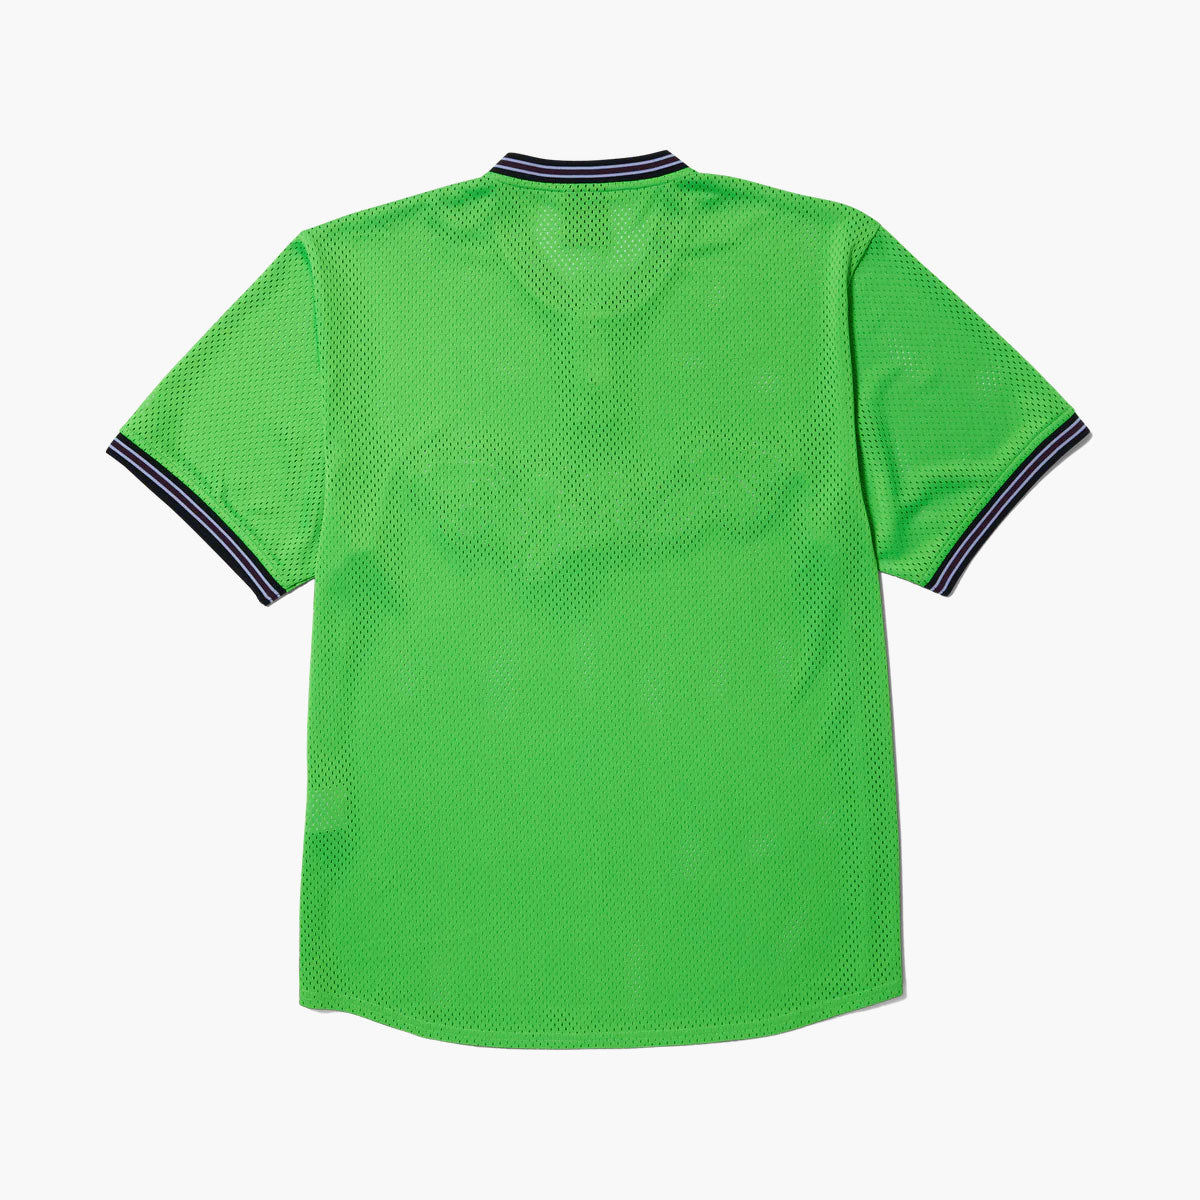 Halftime Henley S/s Jersey Clover